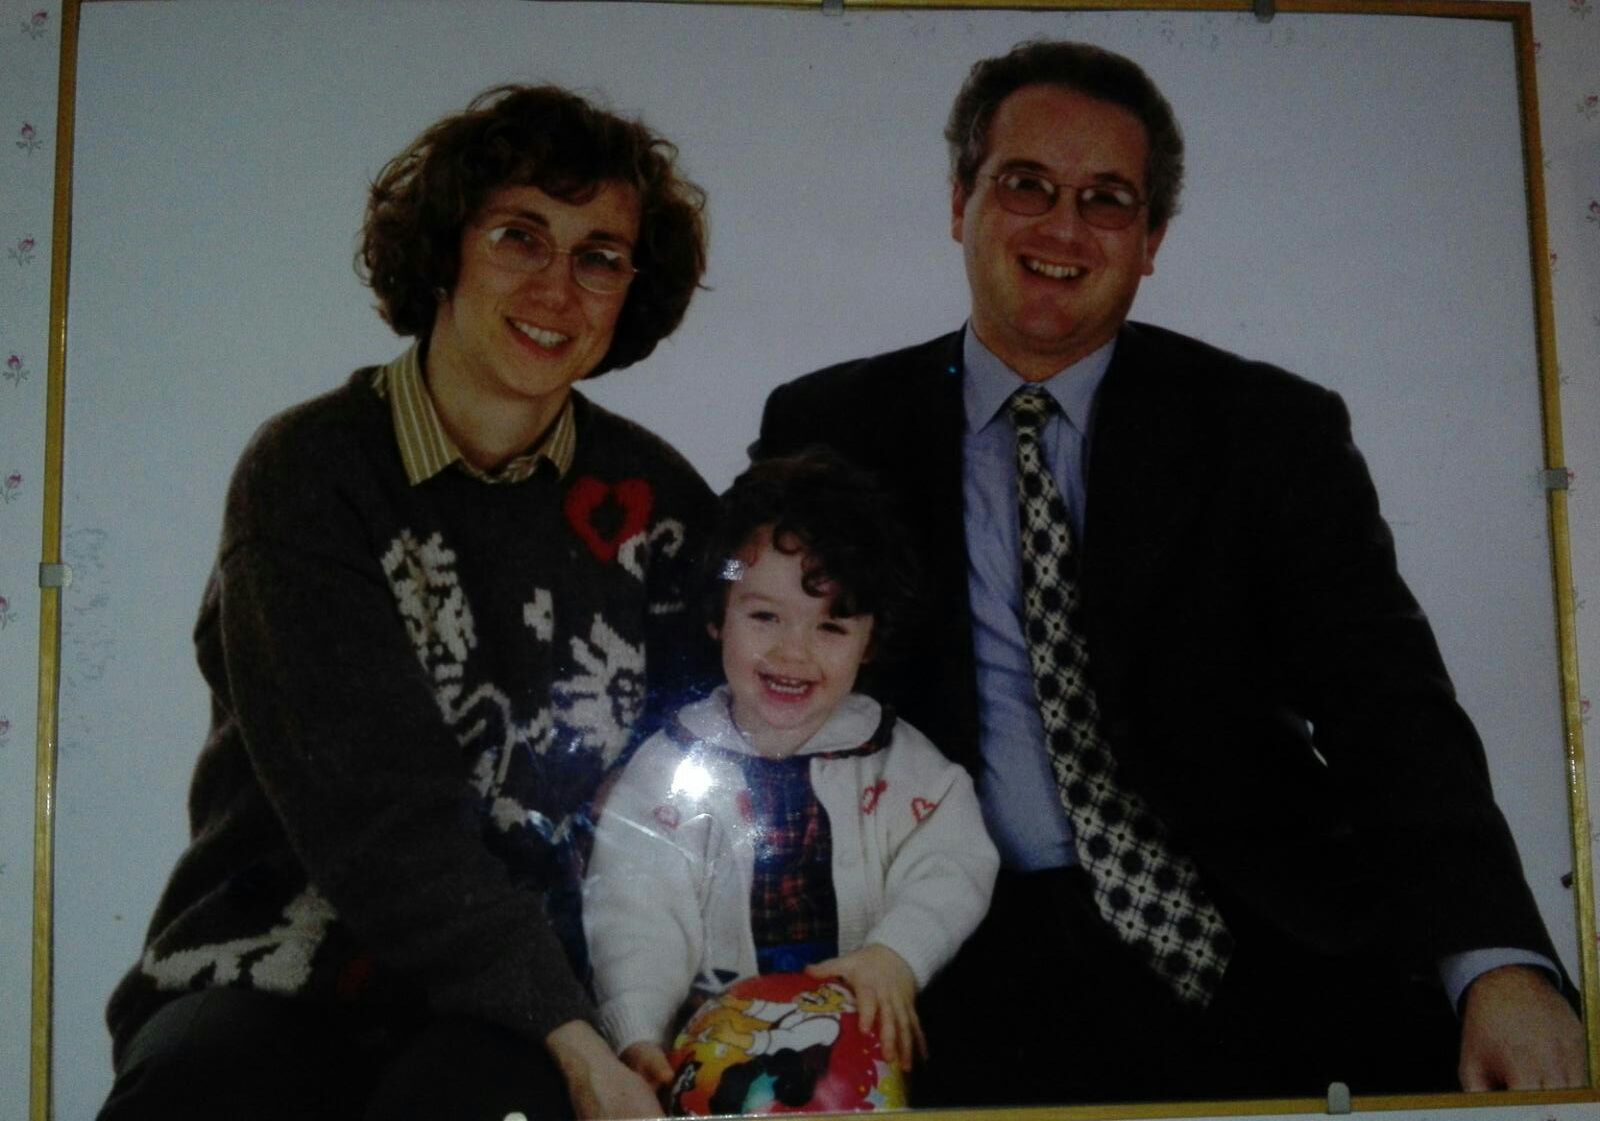 Maria with her parents, they not changed much.